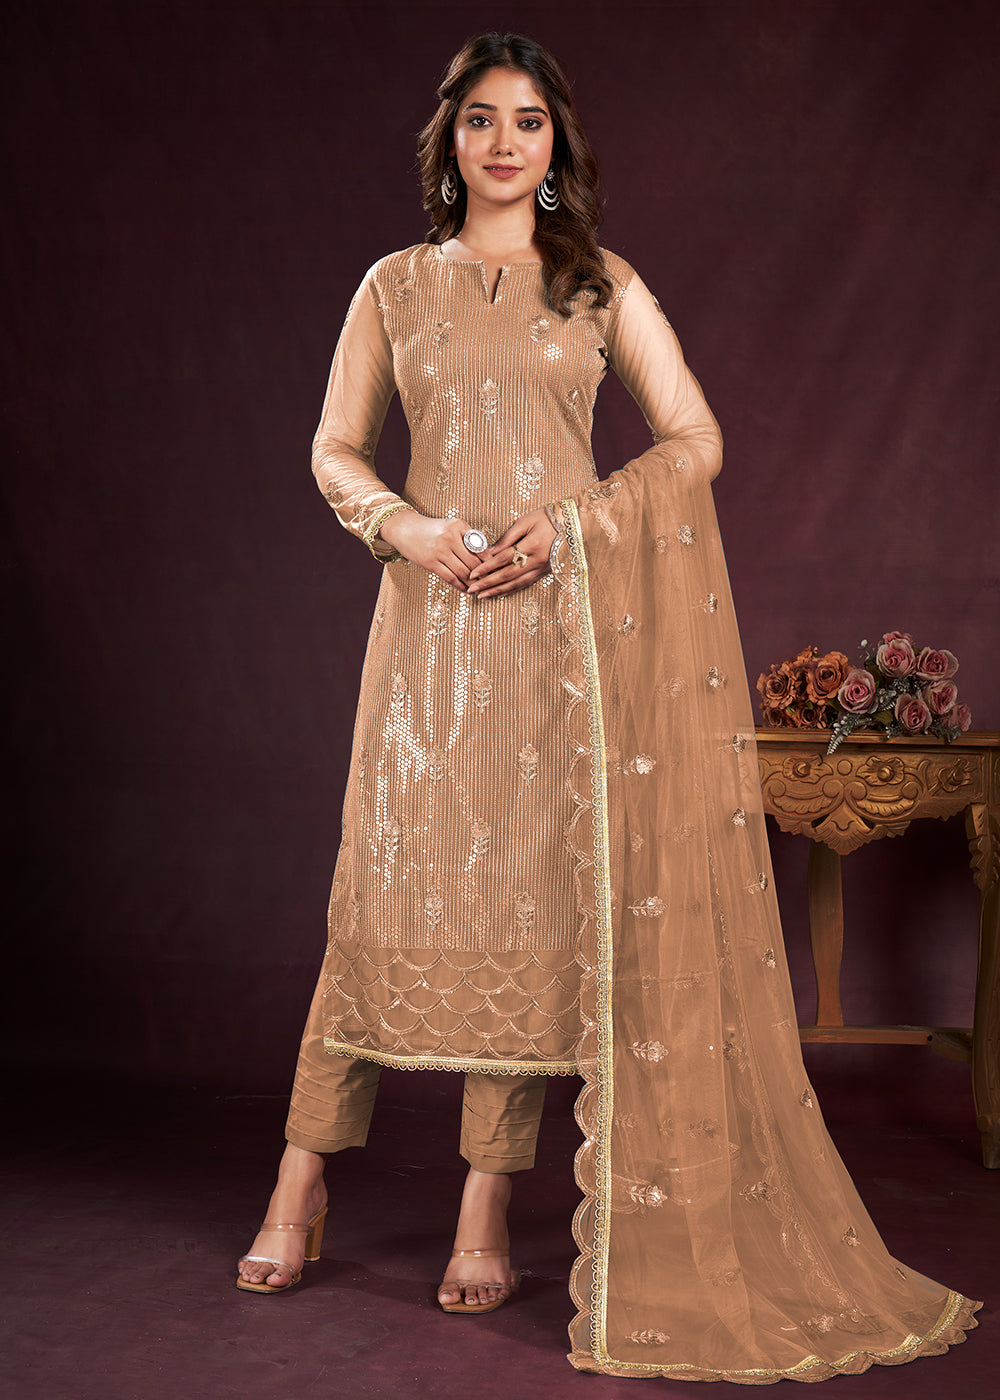 Buy Now Beige Butterfly Net Embroidered Festive Salwar Suit Online in USA, UK, Canada, Germany, Australia & Worldwide at Empress Clothing. 